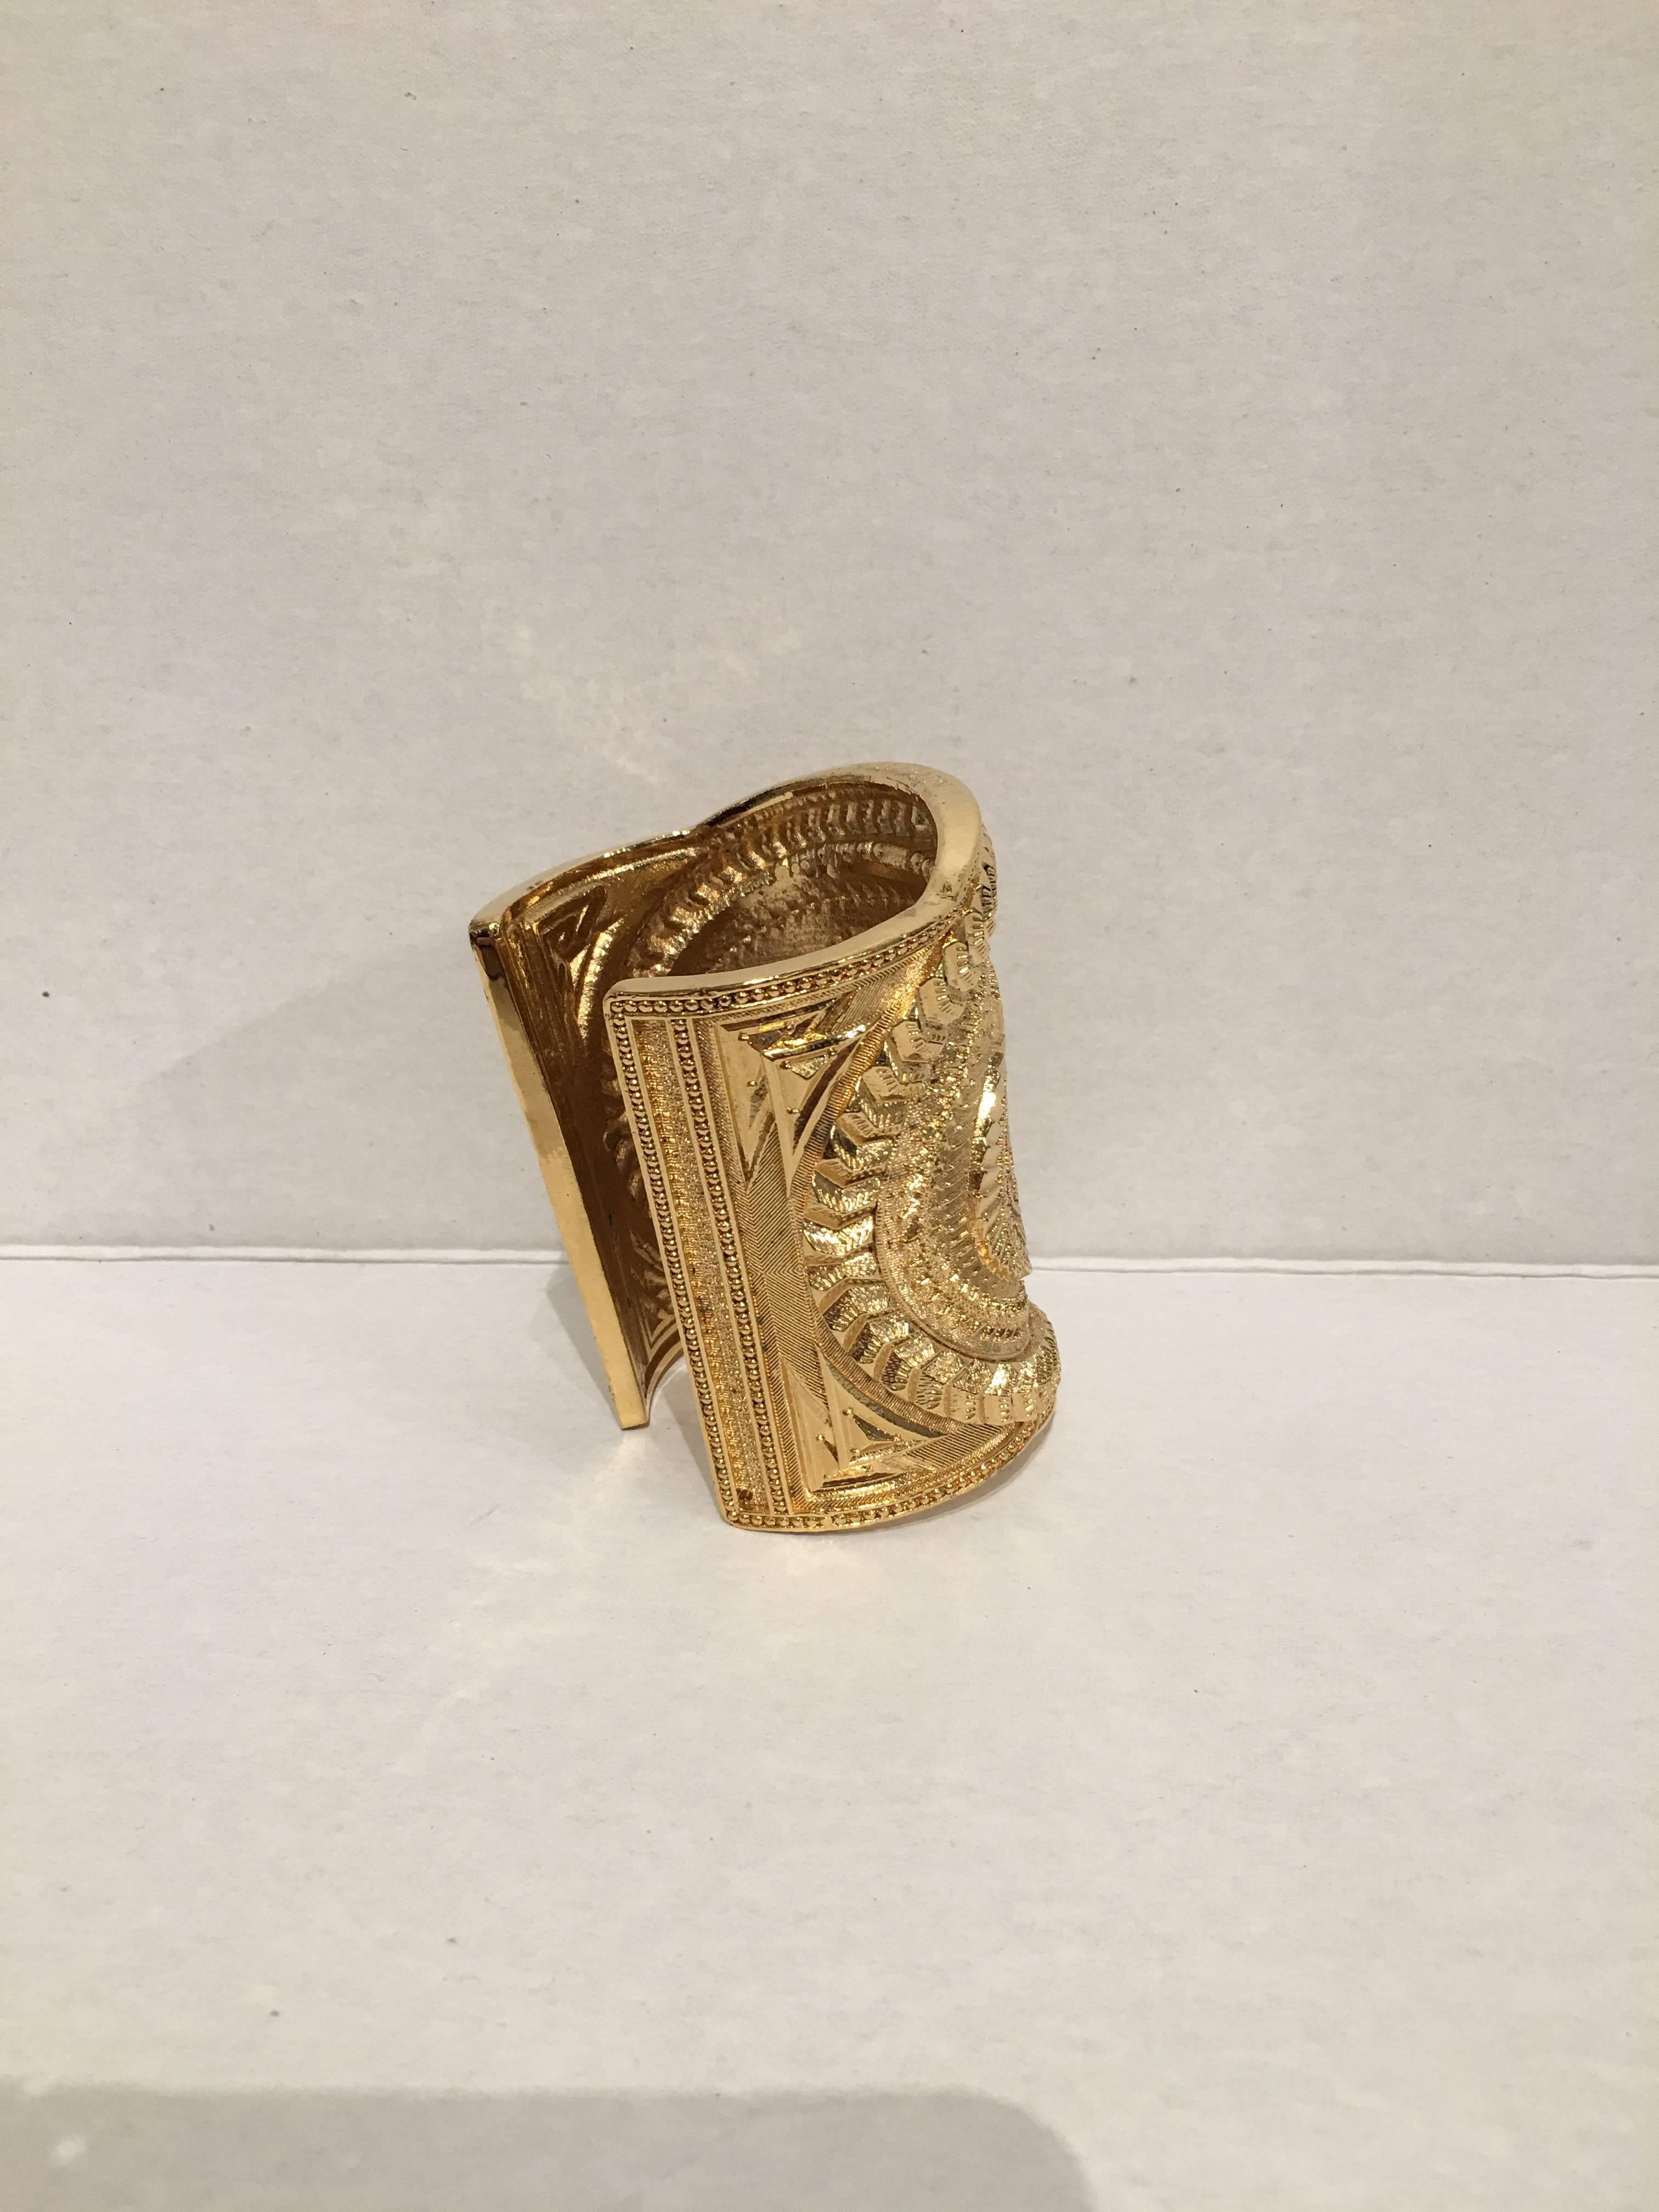 Balmain ornately designed gold cuff from the Spring 2012 collection, designed by Stephanie Manchette.